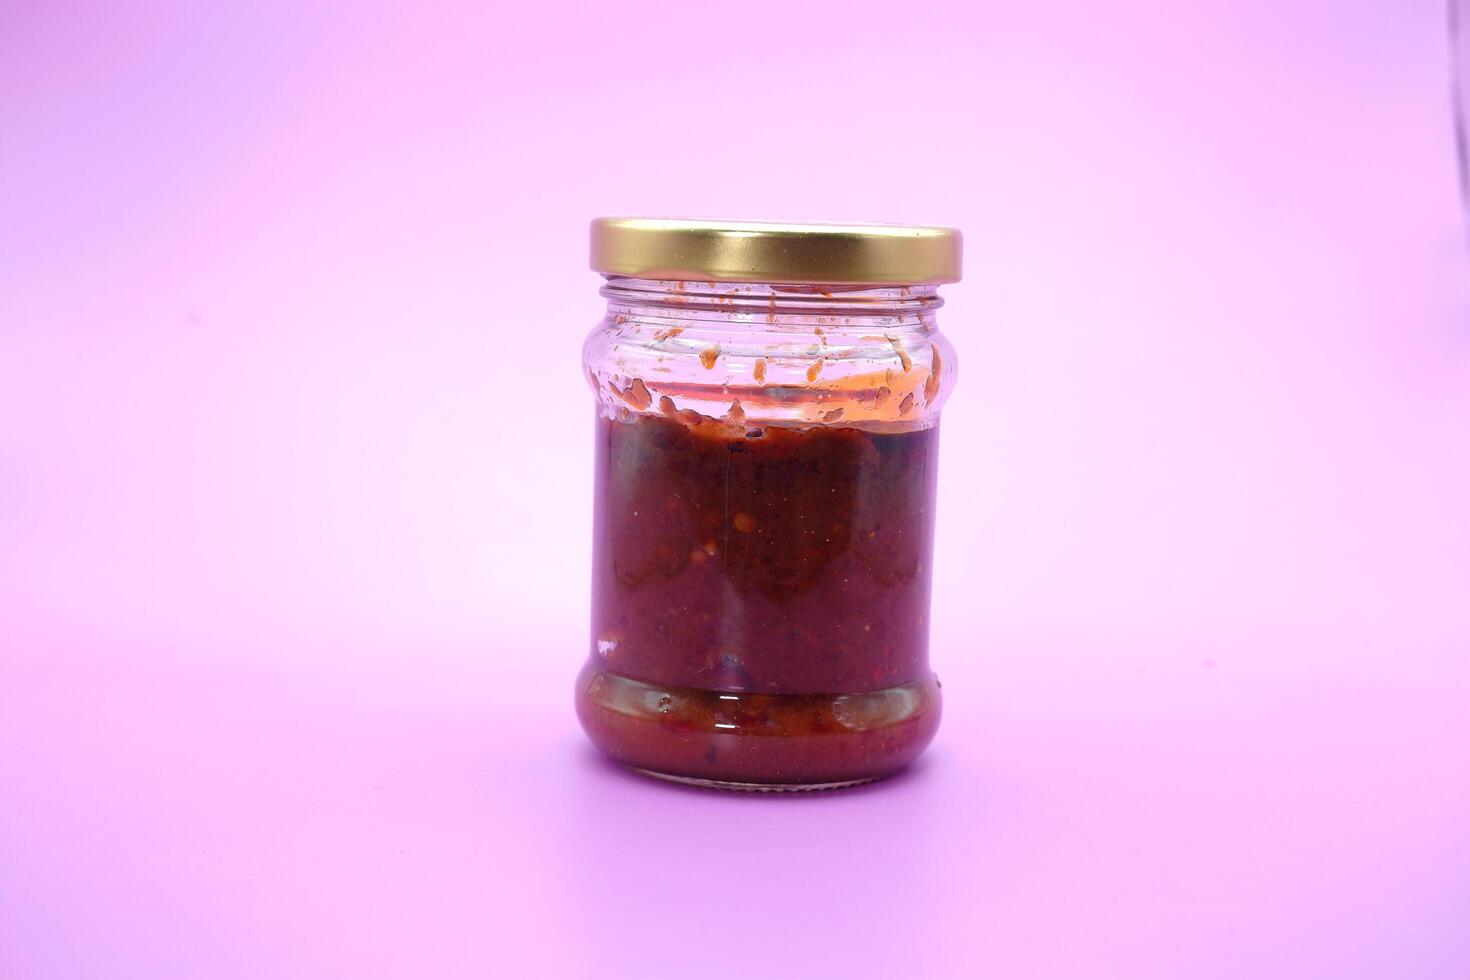 chili sauce in a glass bottle. chili sauce isolated on a purple background. photo